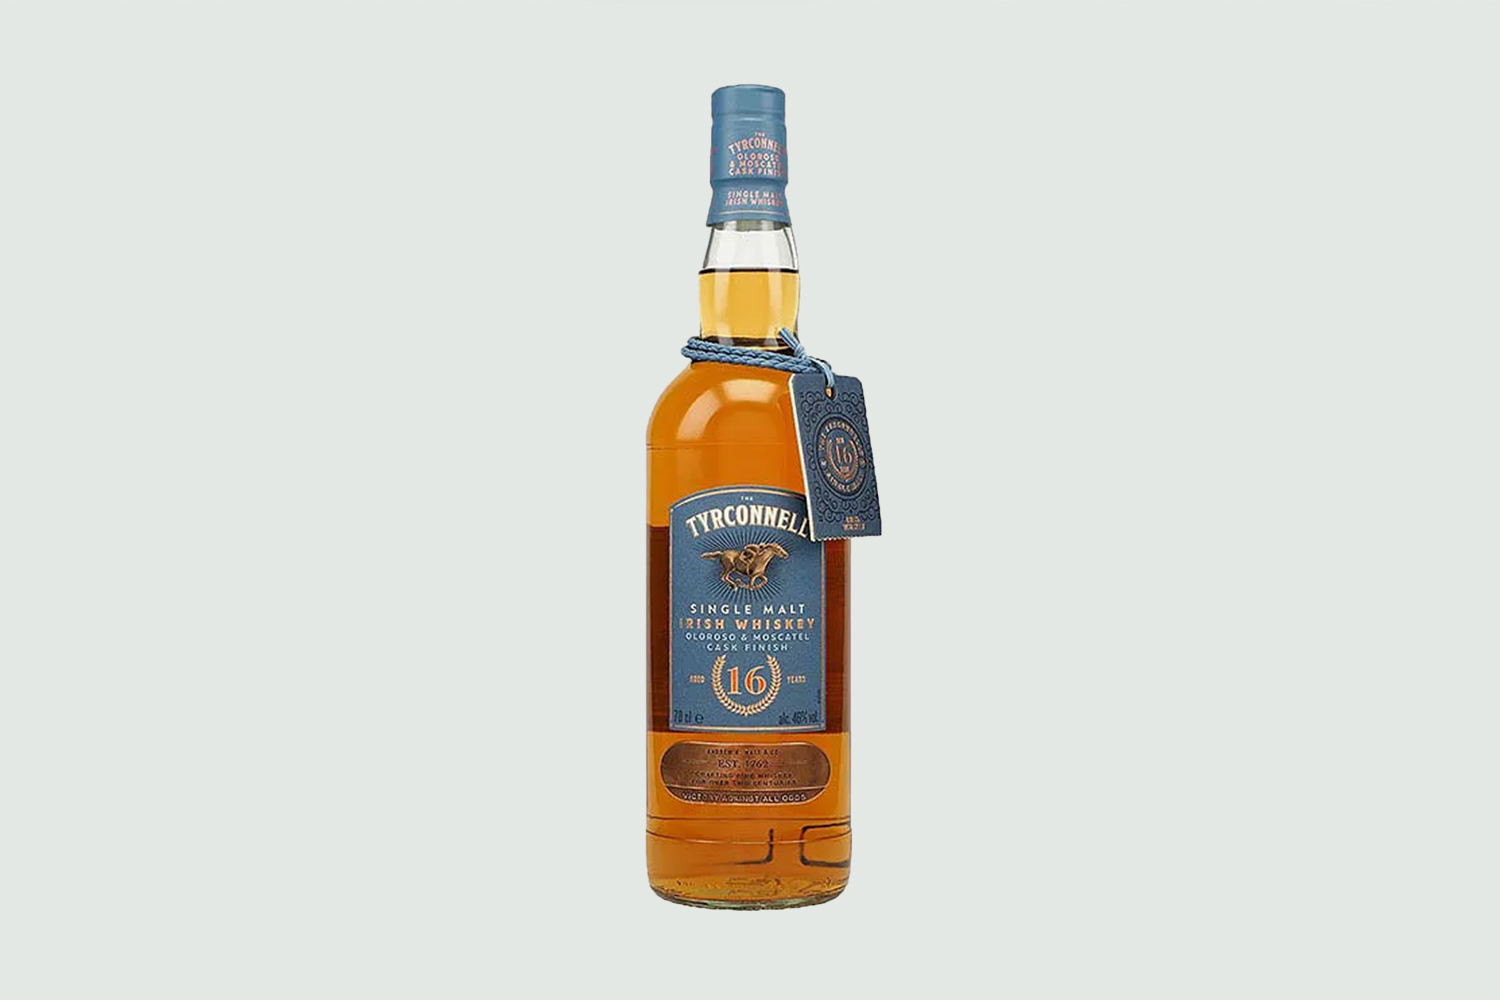 The Tyrconnell 16 Year Old Oloroso & Moscatel Cask Finish Single Malt